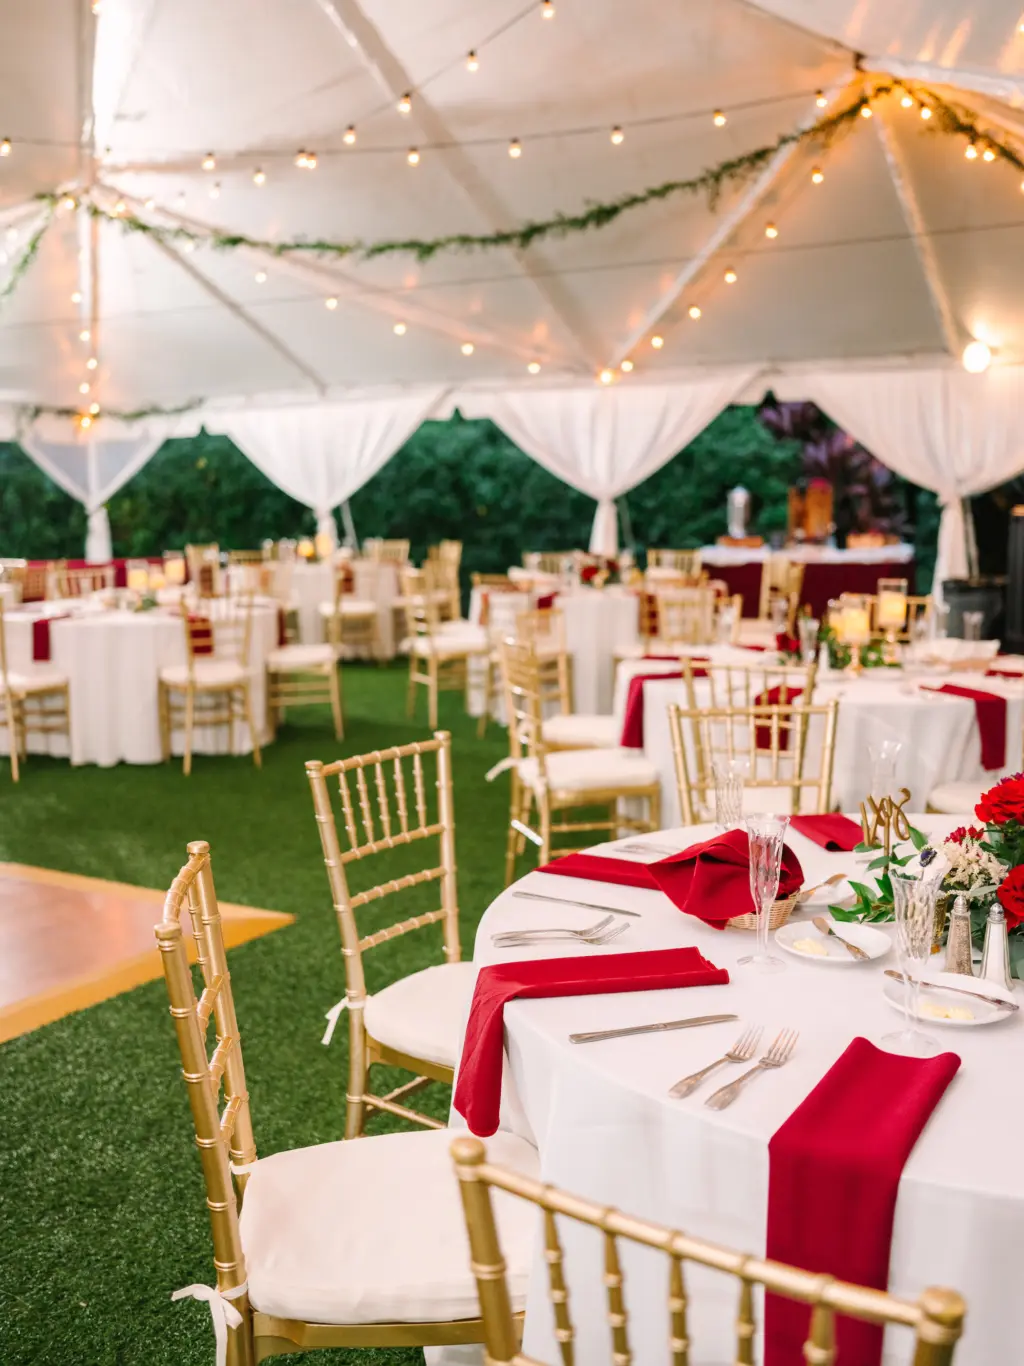 Red and White Tented Christmas Inspired Wedding Reception Decor Ideas | Downtown St. Petersburg Florida Event Venue Sunken Gardens